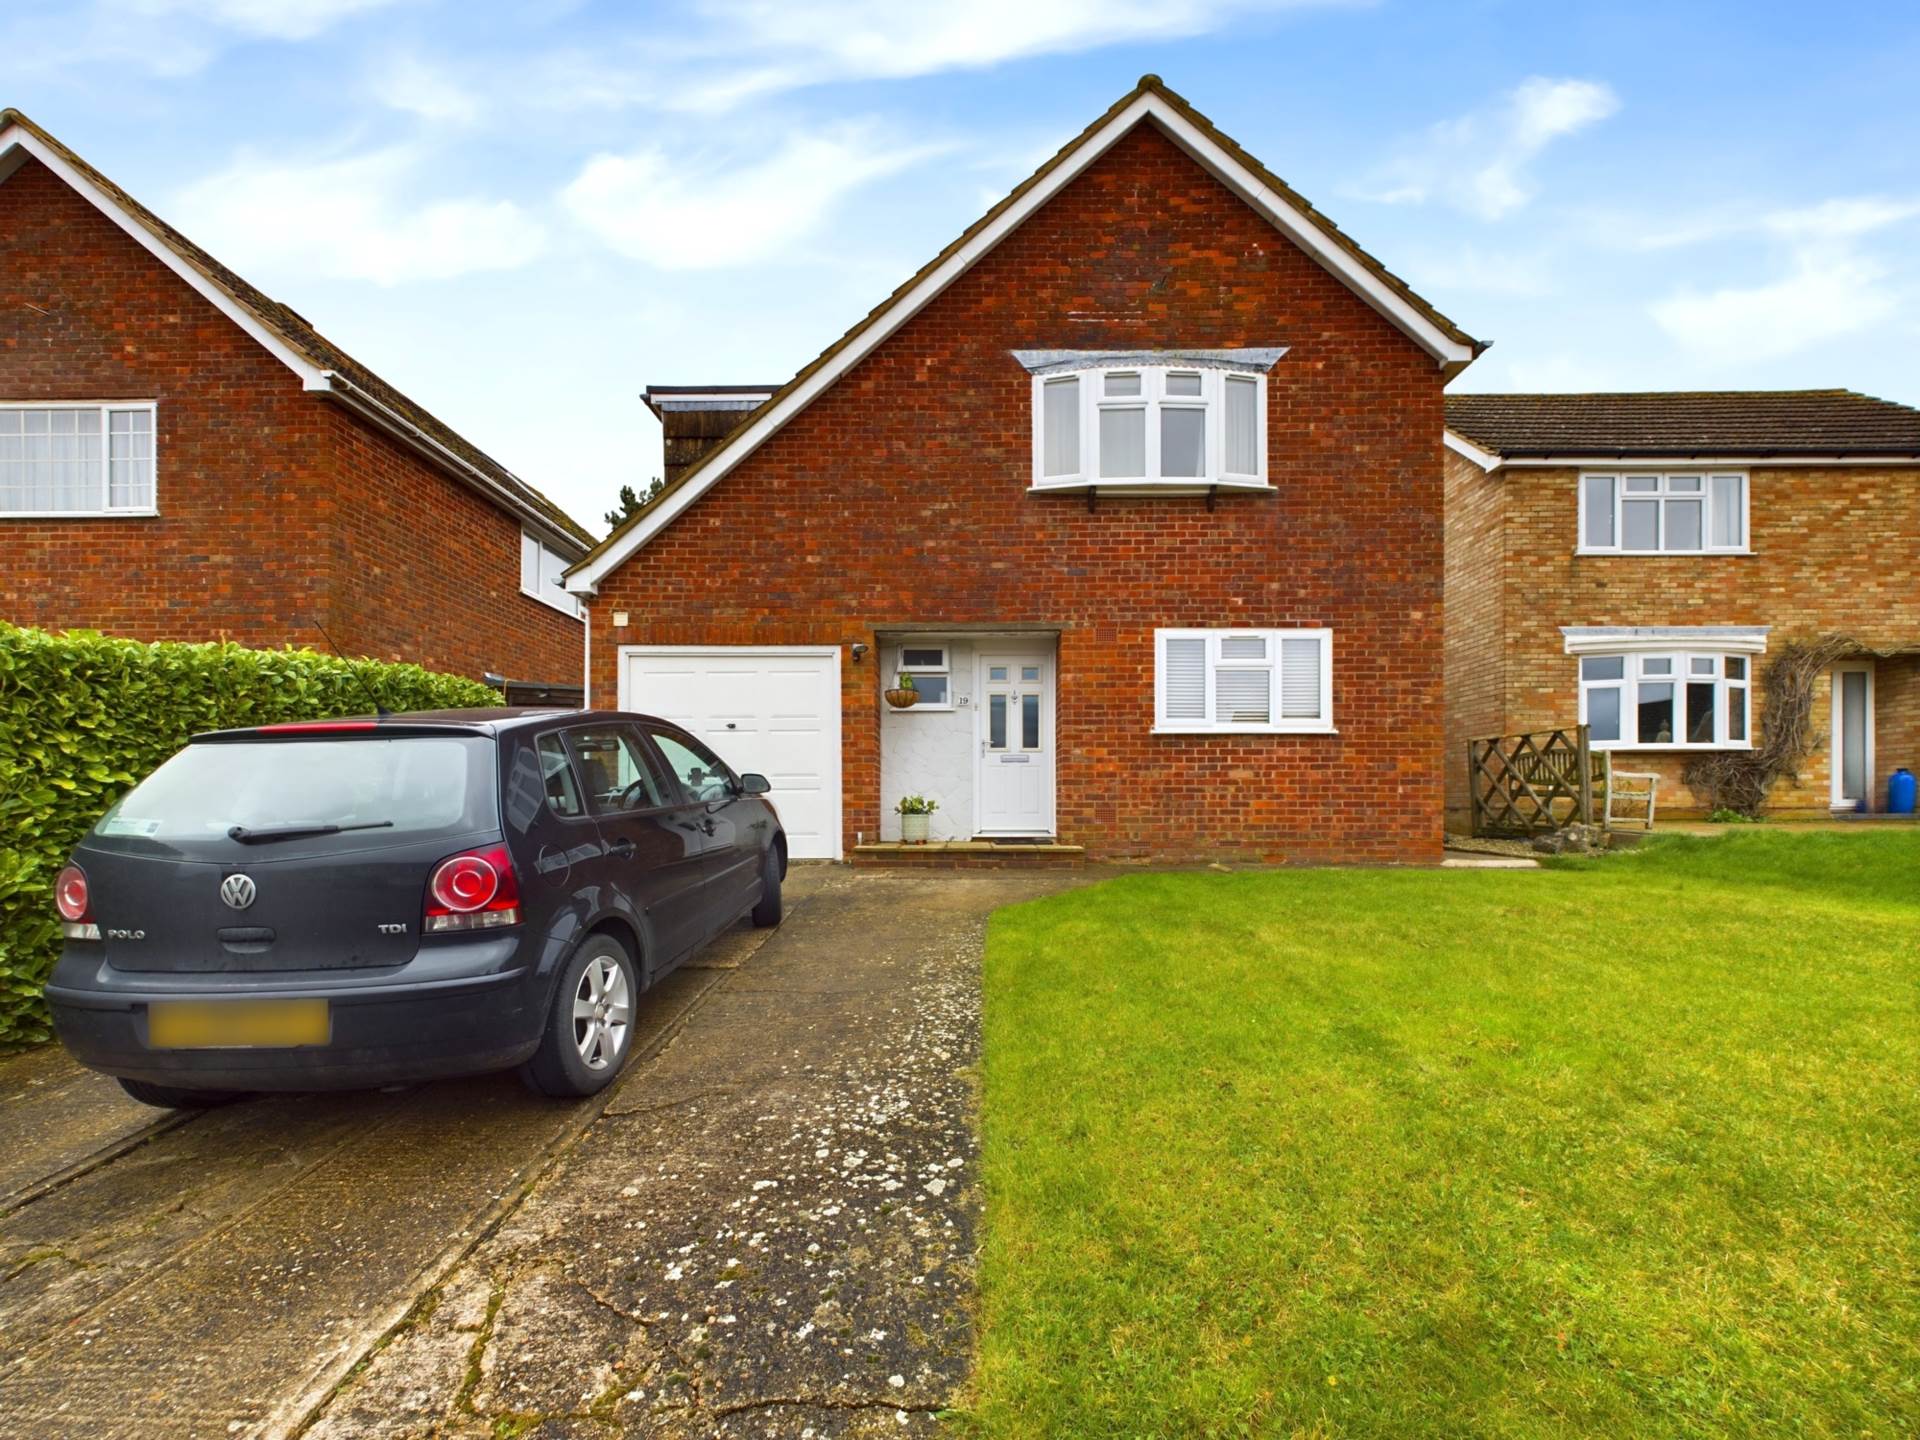 4 bed Detached House for rent in Aylesbury. From Bonners & Babingtons - Chinnor